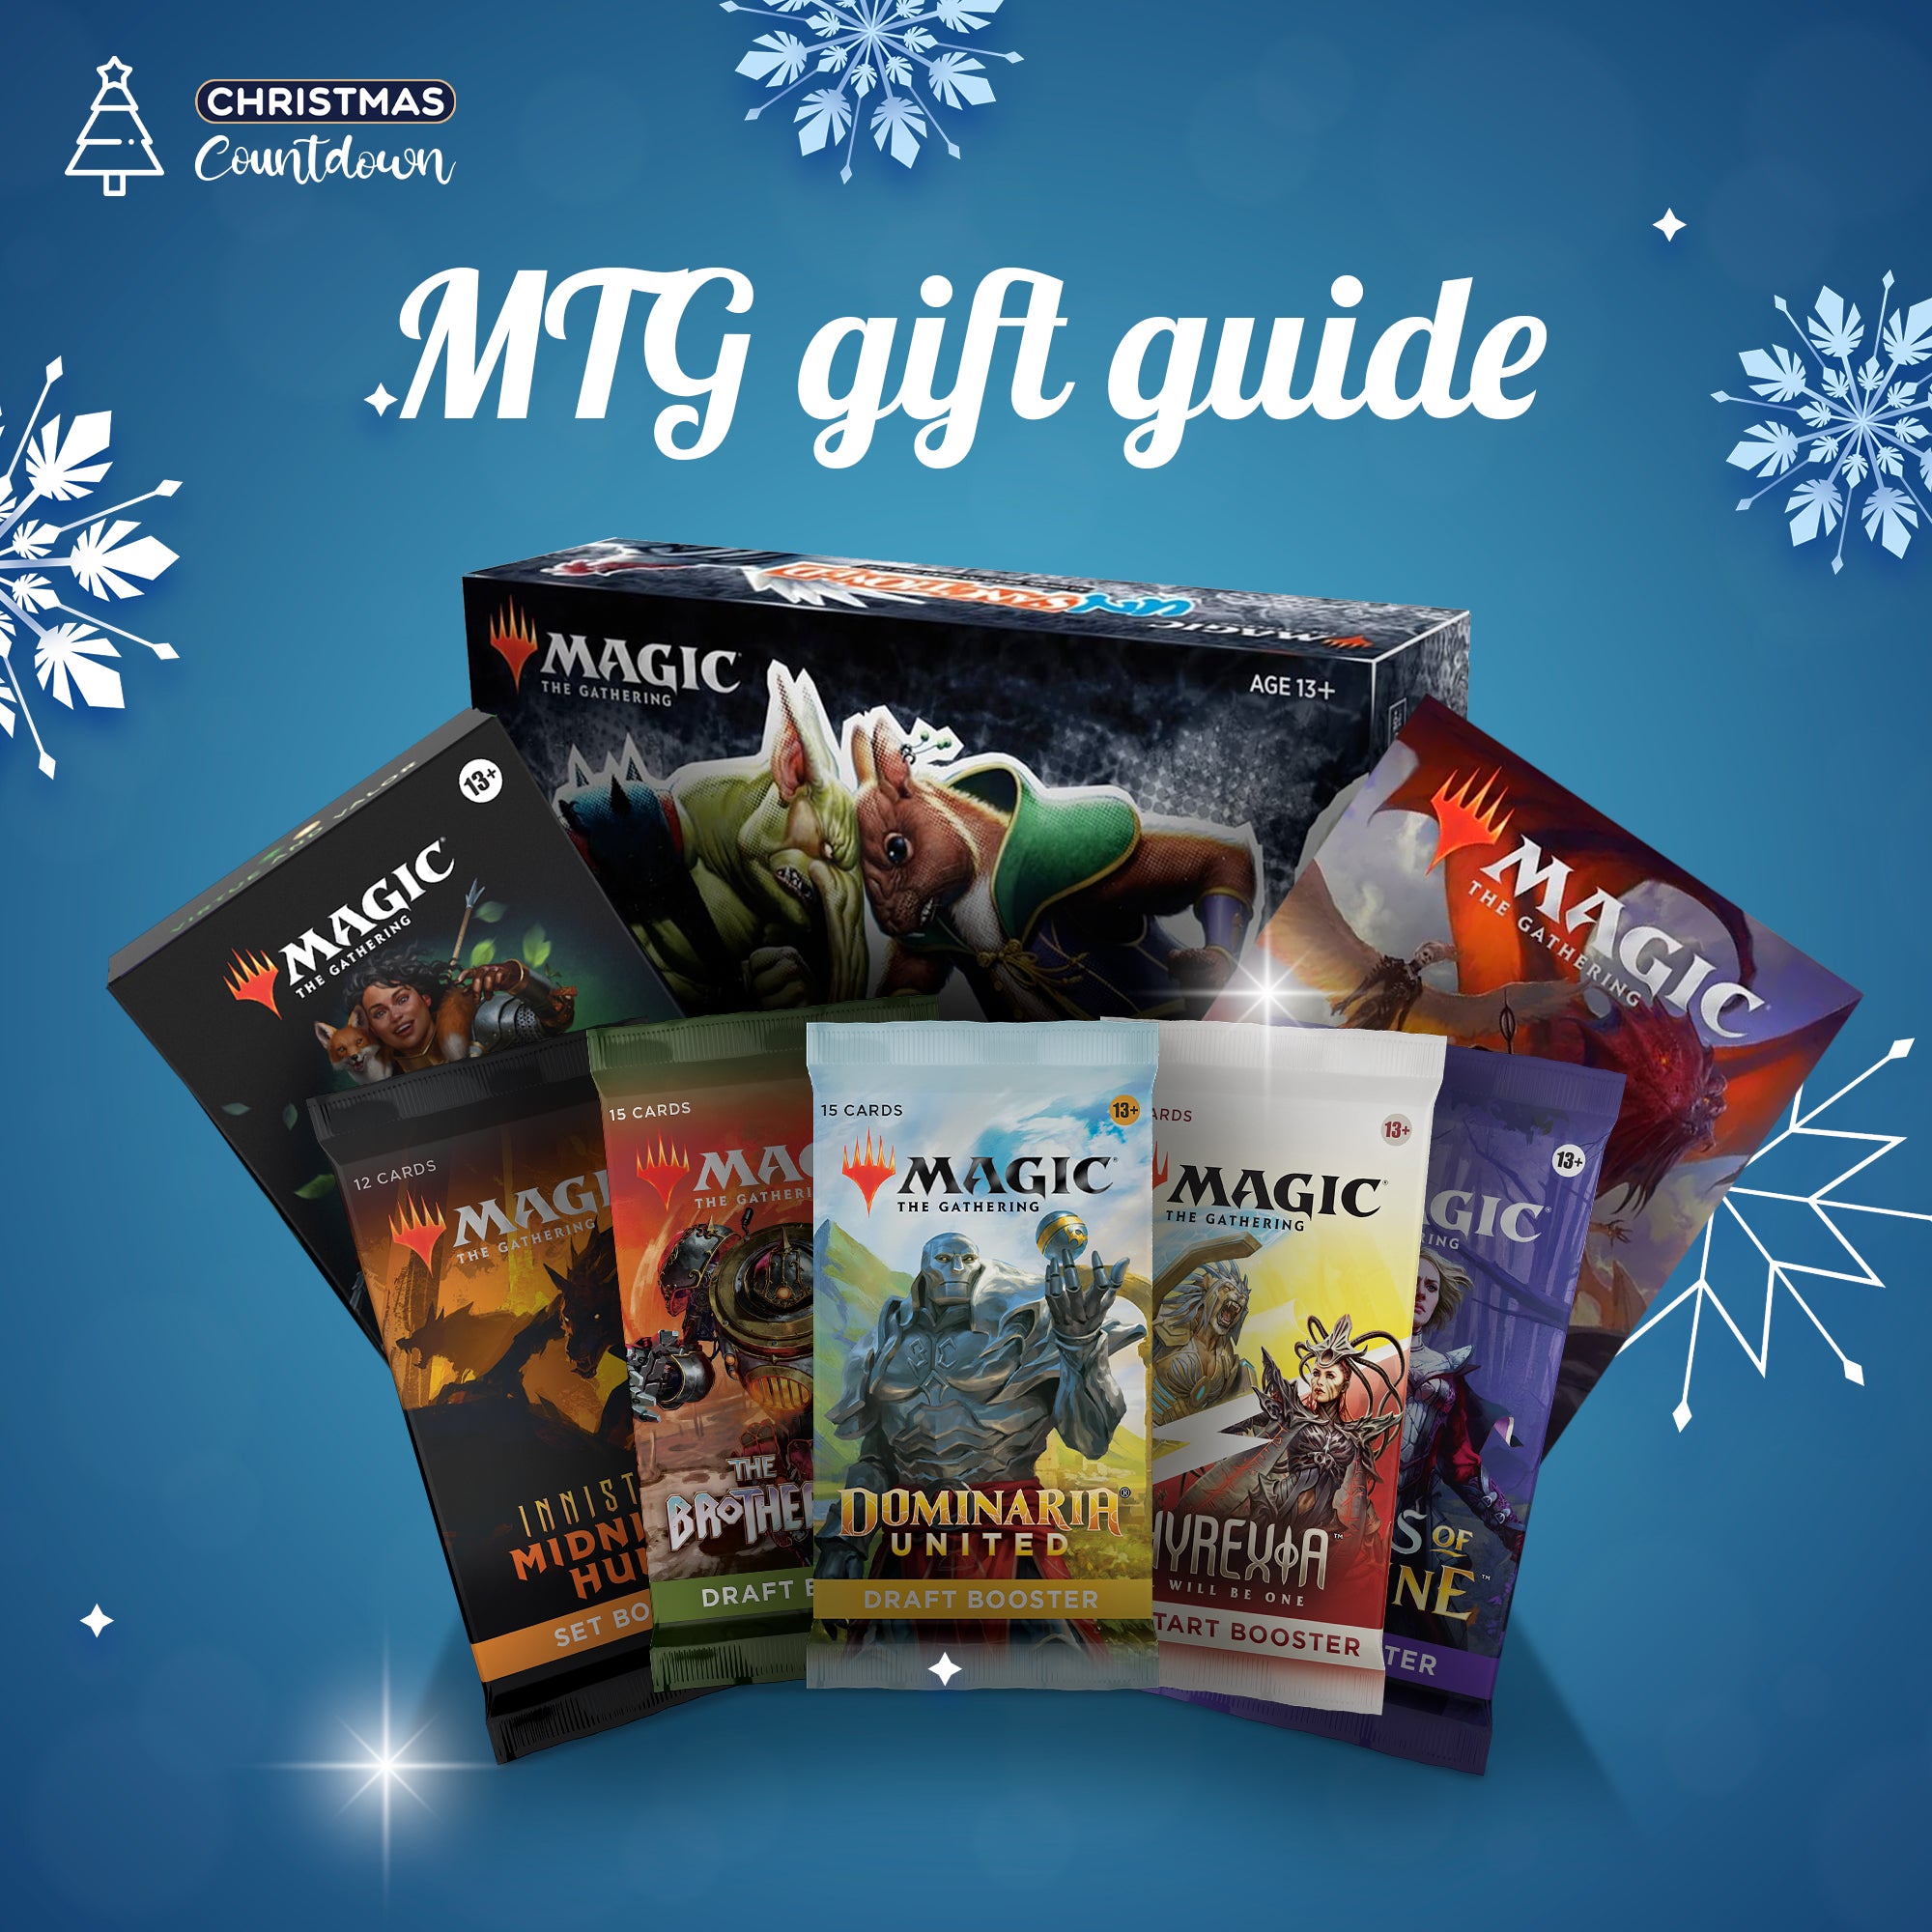 Top Christmas Gifts for Magic the Gathering players and collectors!